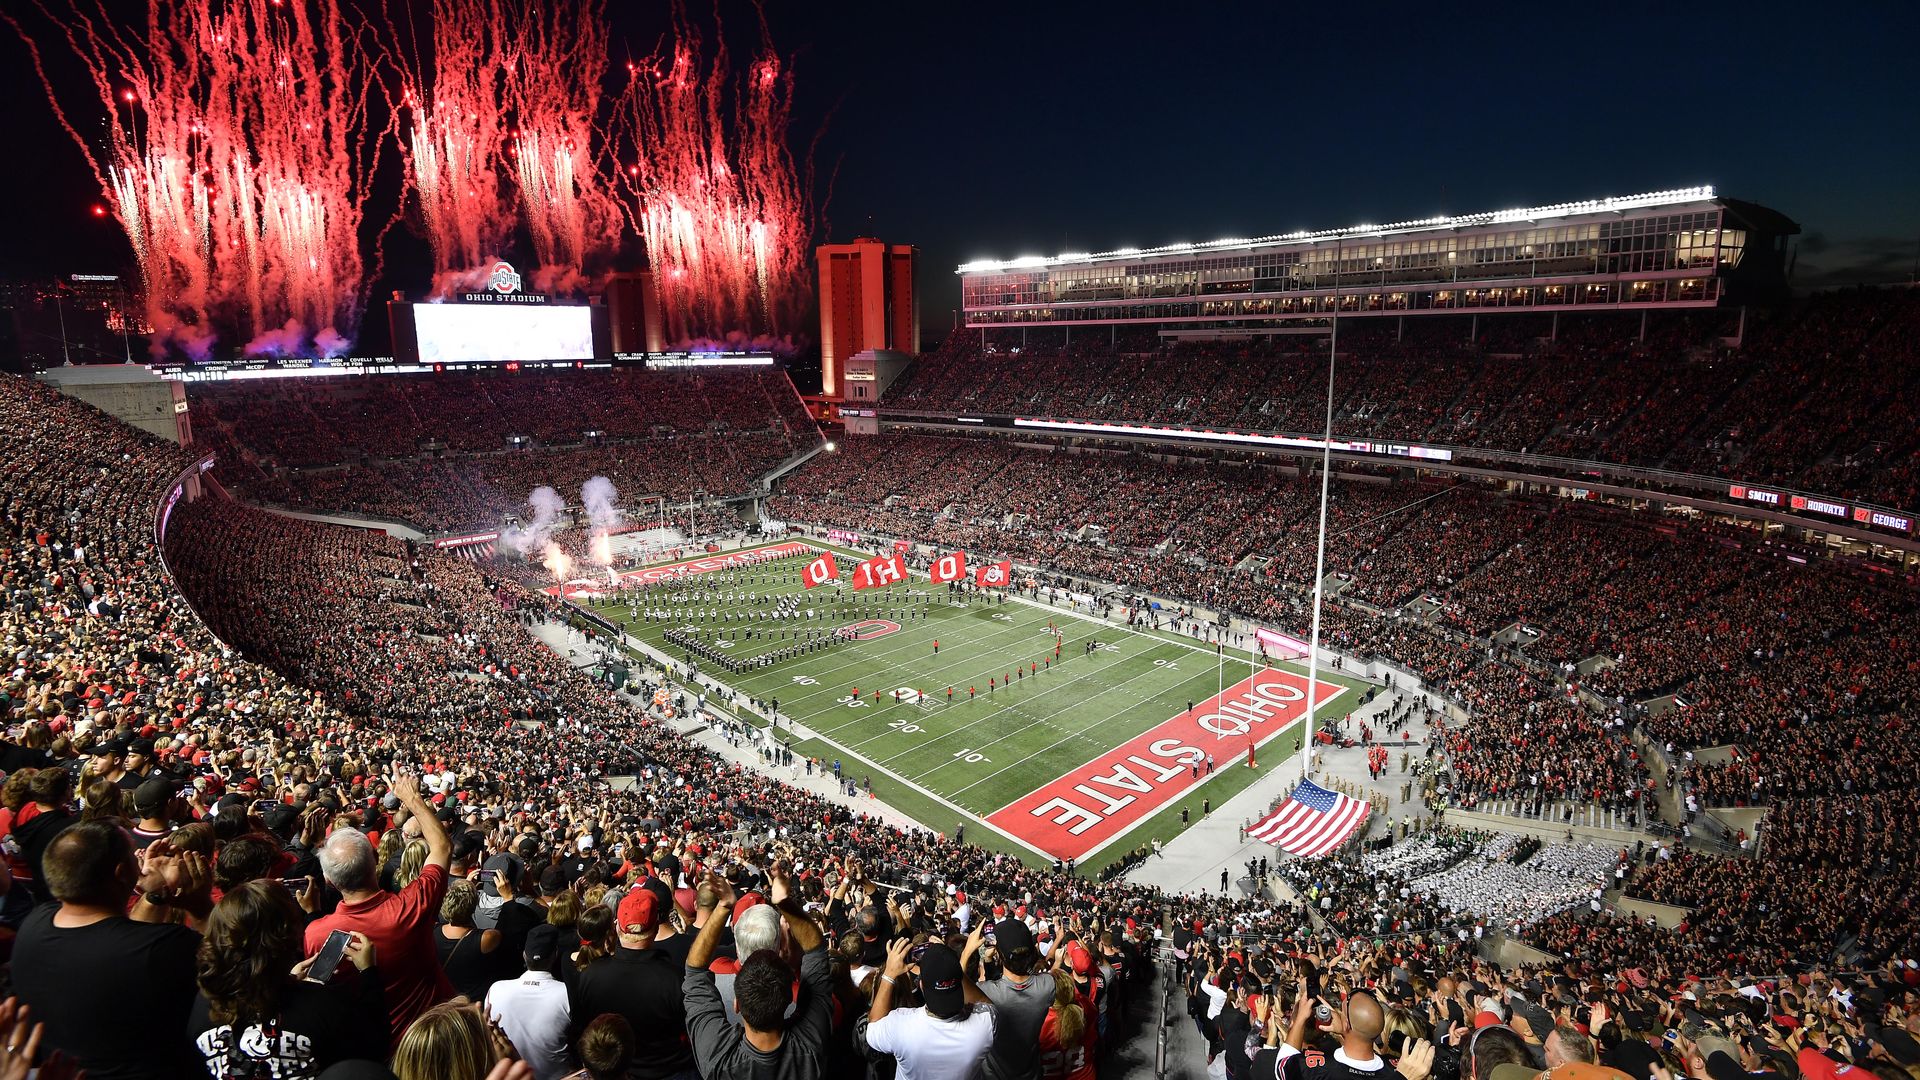 An overview of Ohio Stadium as the Ohio State football team takes the field and red fireworks launch